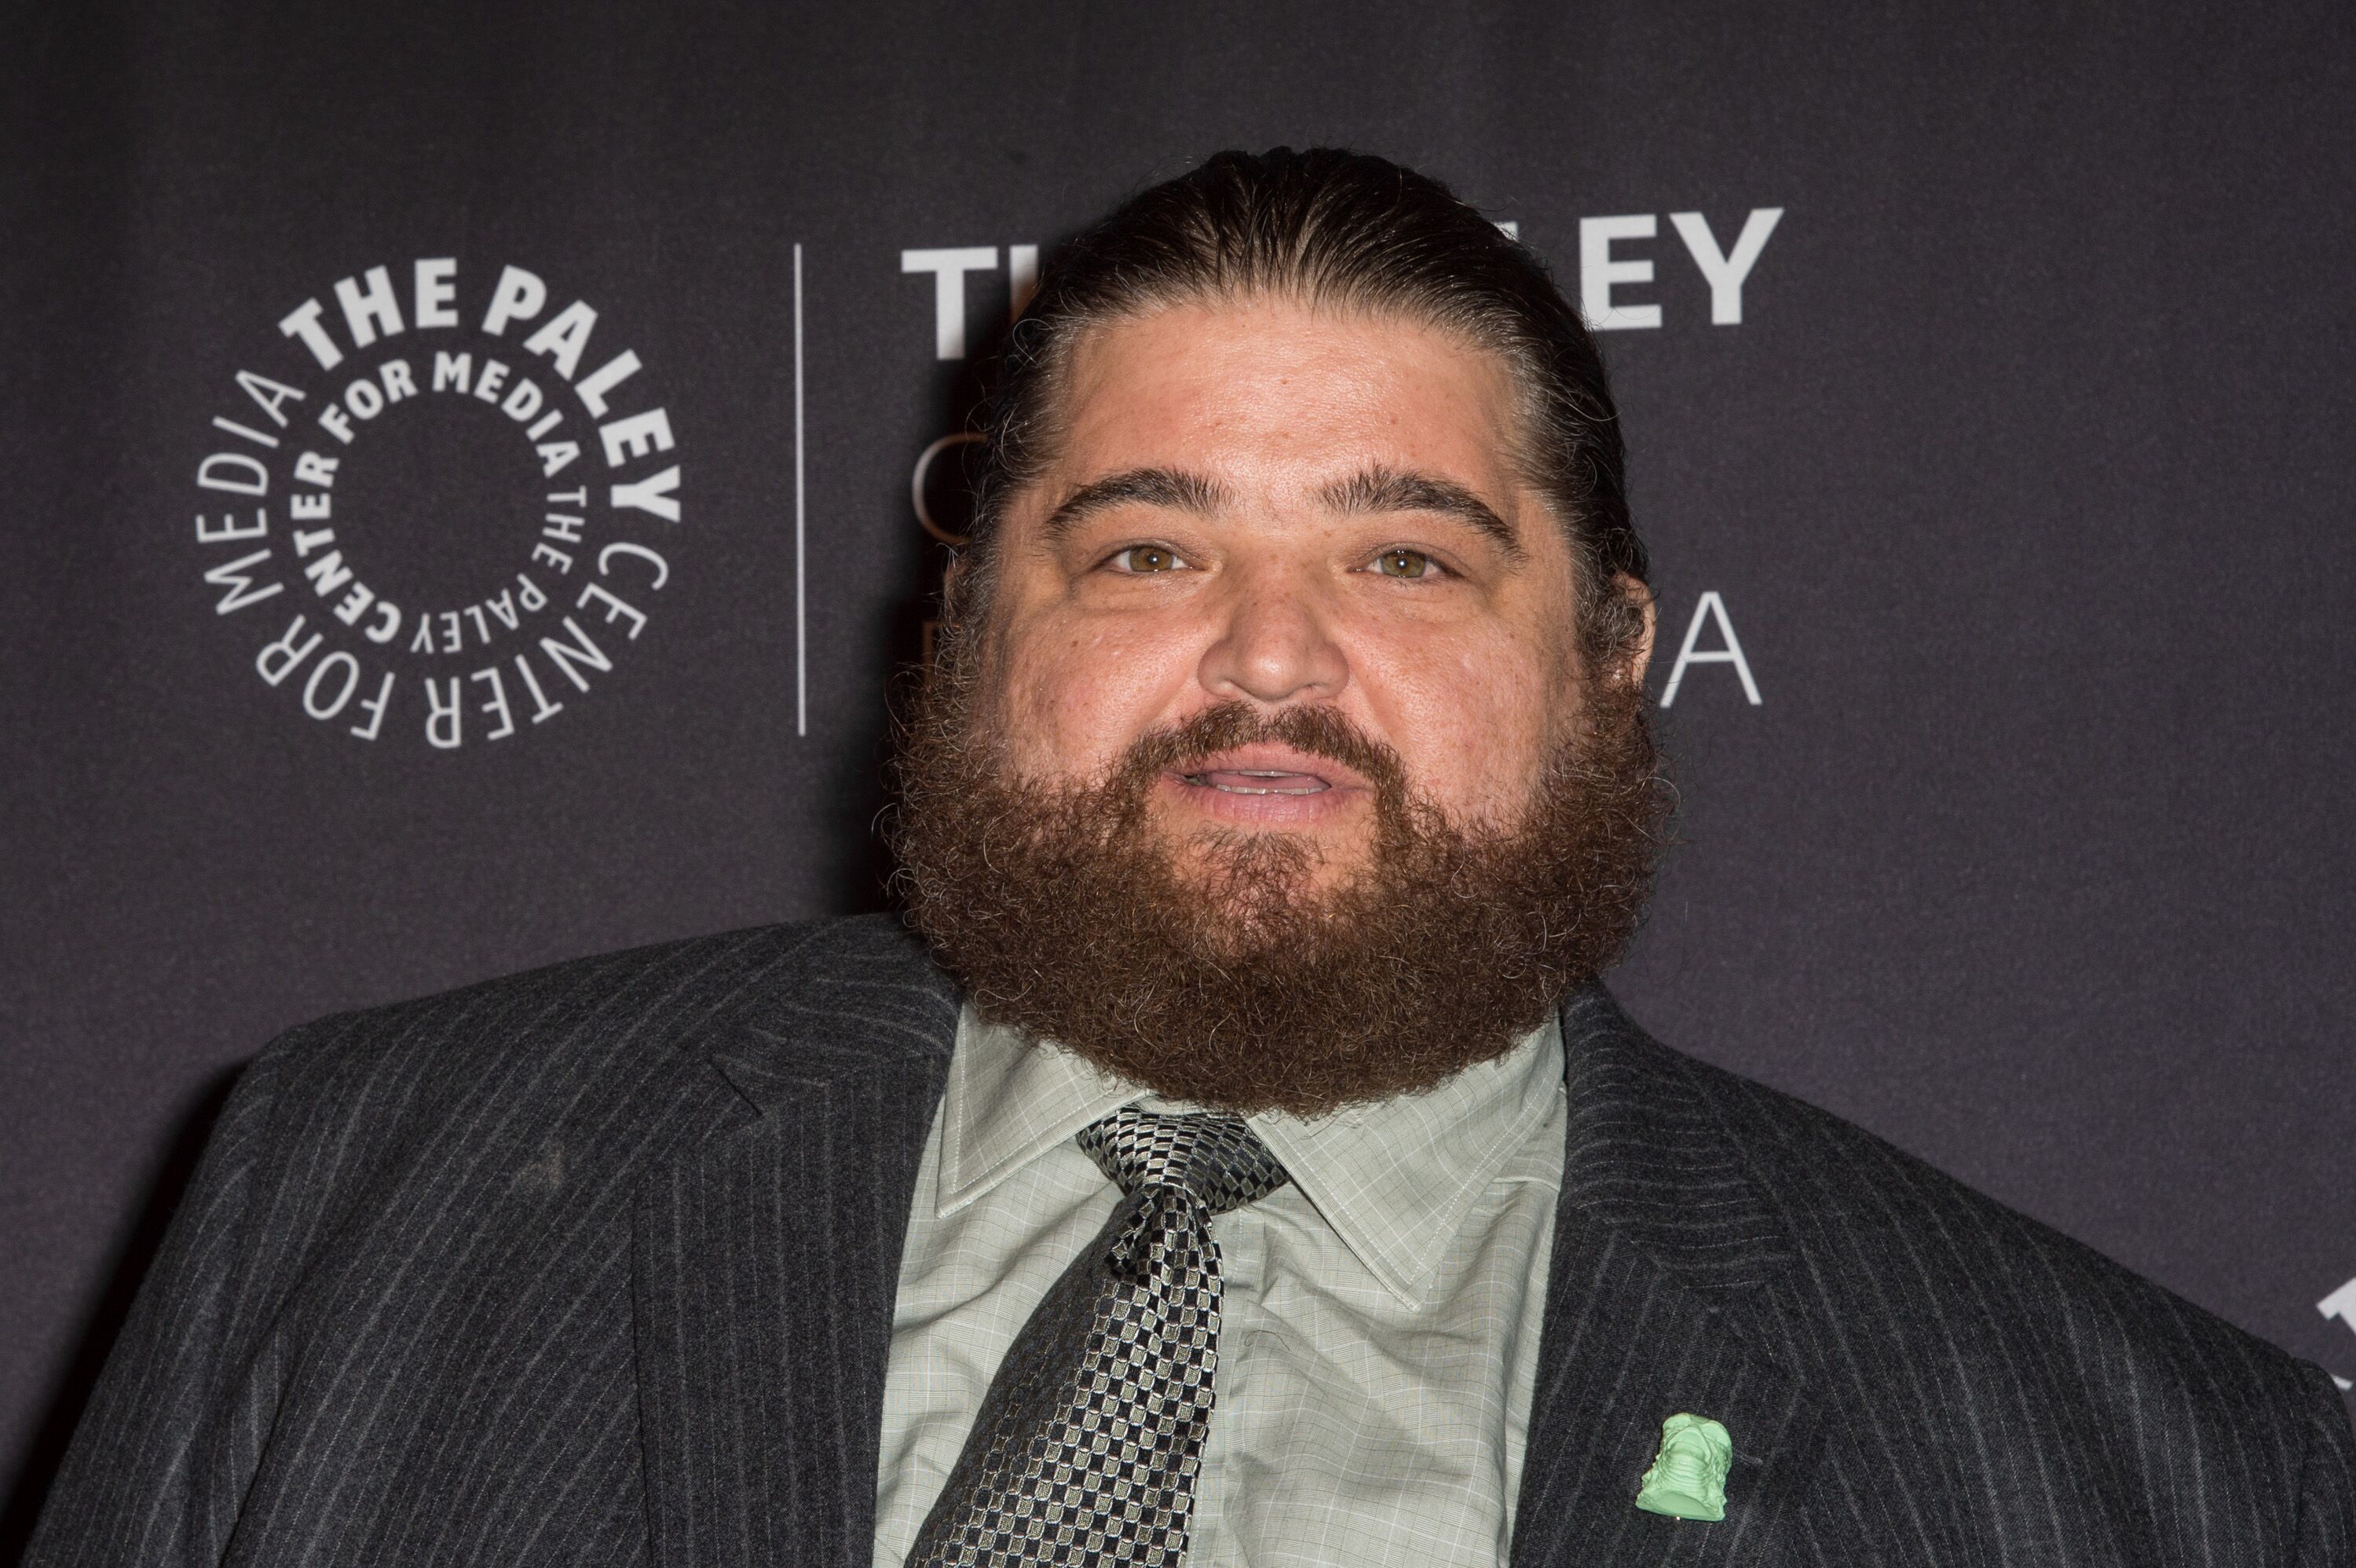  Jorge Garcia arrives at The Paley Center for Media's Hollywood Tribute to Hispanic Achievements in Television event. | Source: Getty Images